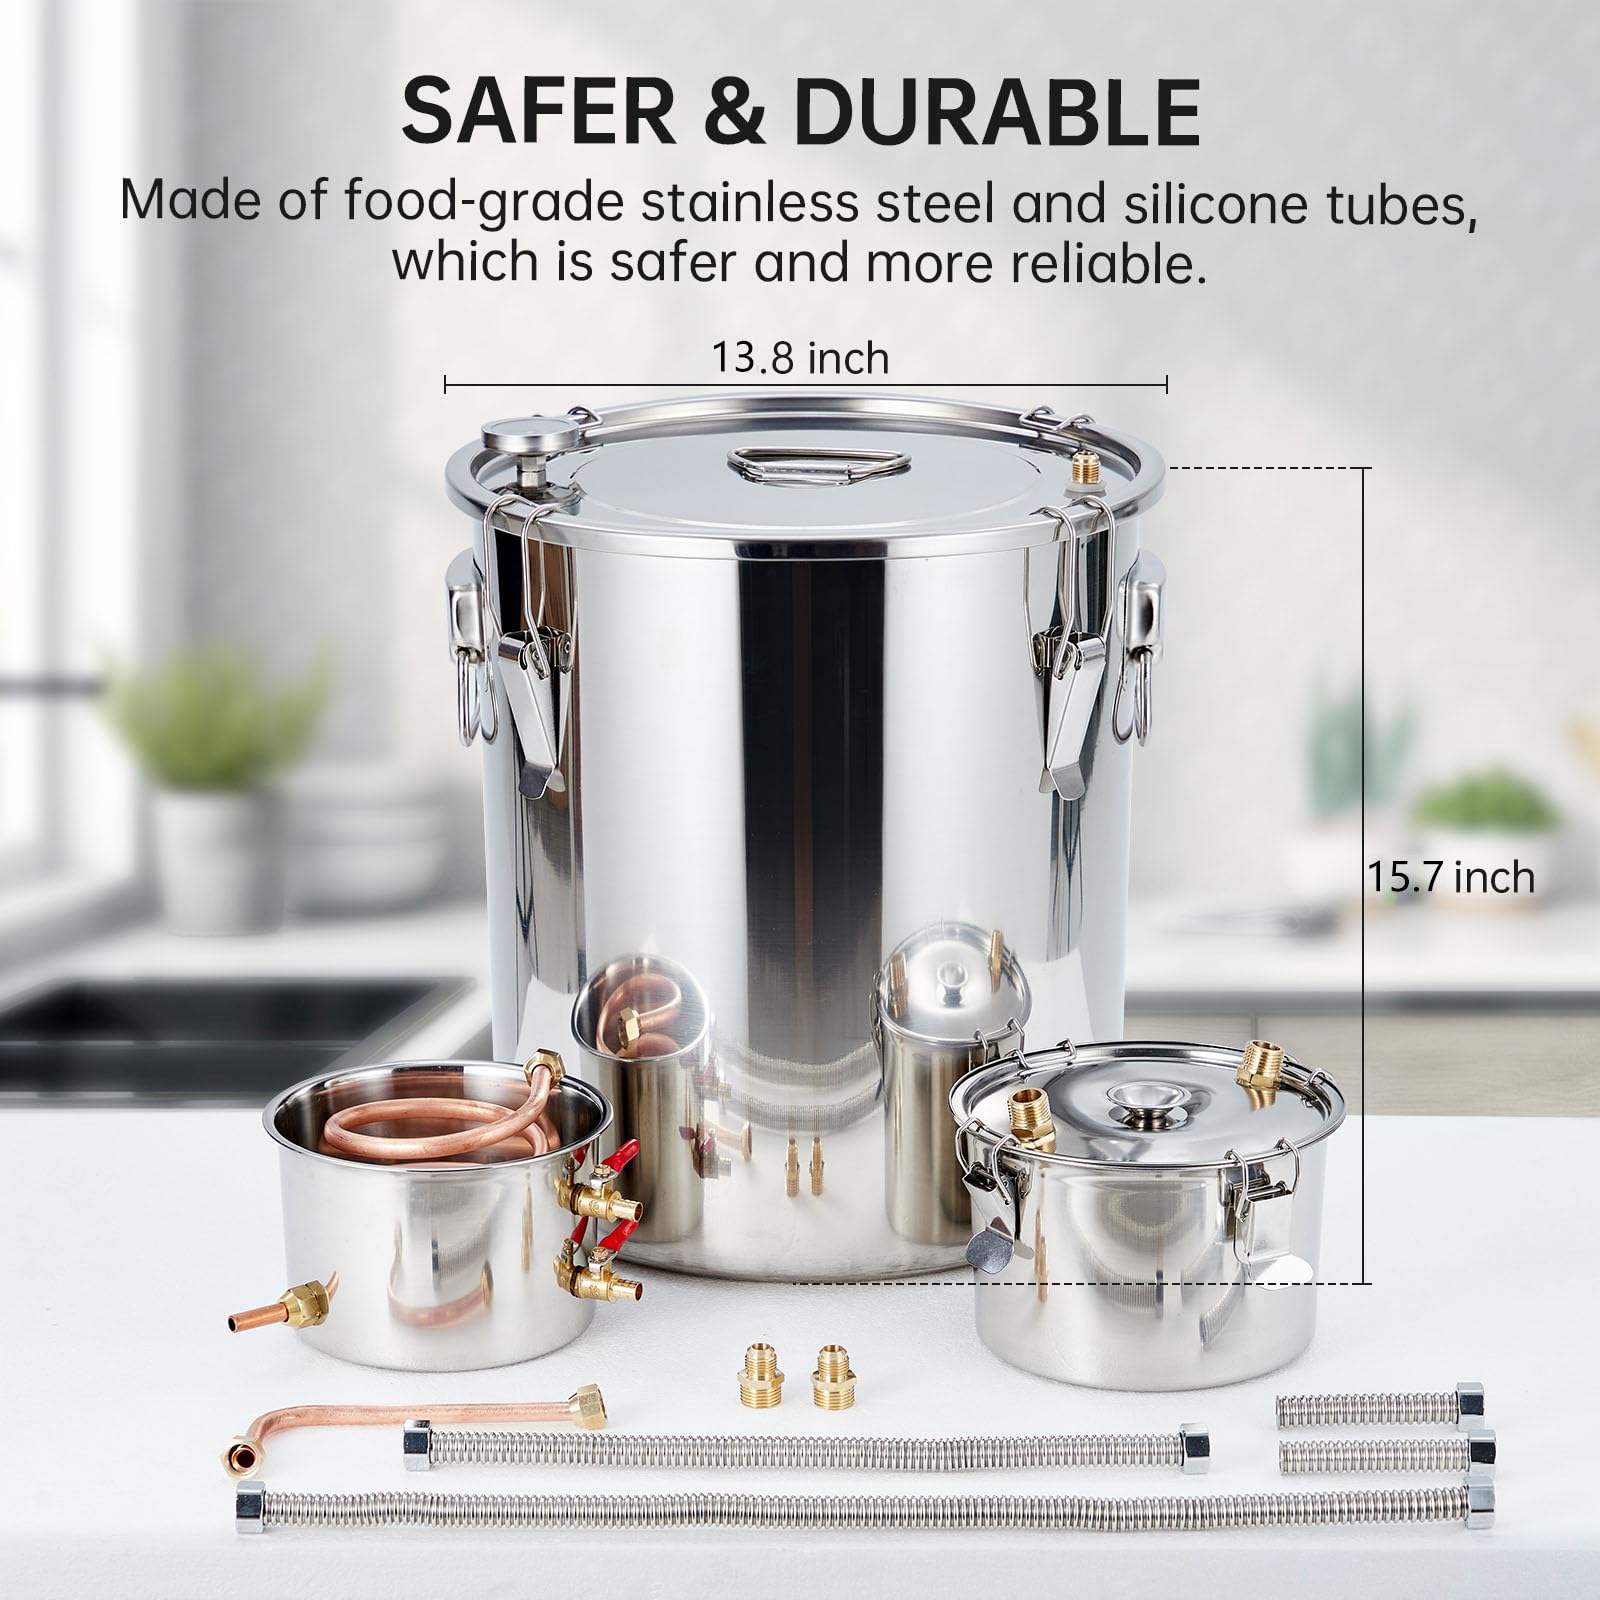 Alcohol Still 10Gal/38L Alcohol Distiller Stainless Steel Distillery Kit for Alcohol With Copper Tube Water Pump Build-in Thermometer, Home Brewing Kit for DIY Whisky Wine Brandy Making